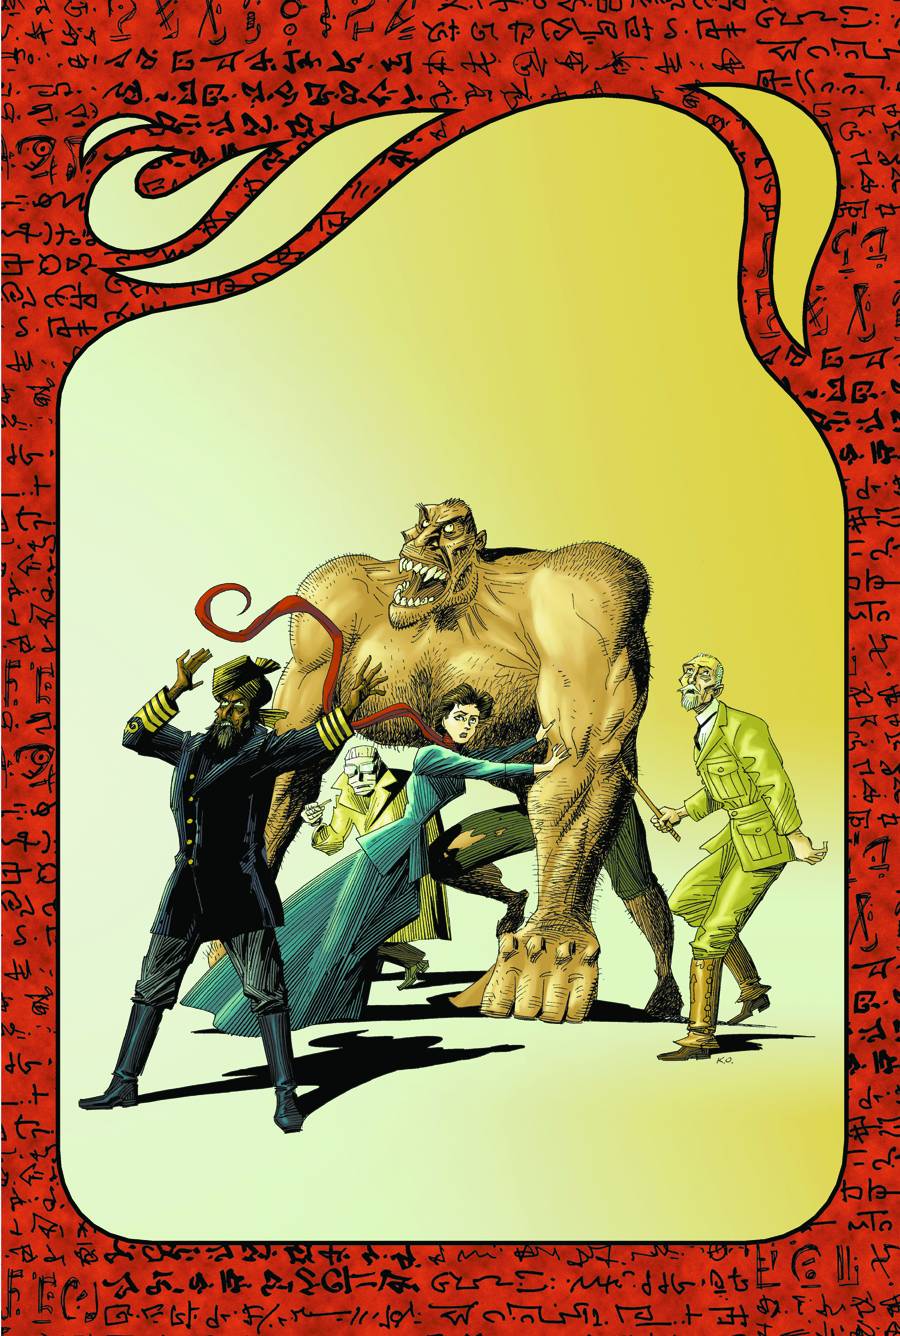 League of Extraordinary Gentlemen The Absolute Edition Oversized Hardcover Volume 2